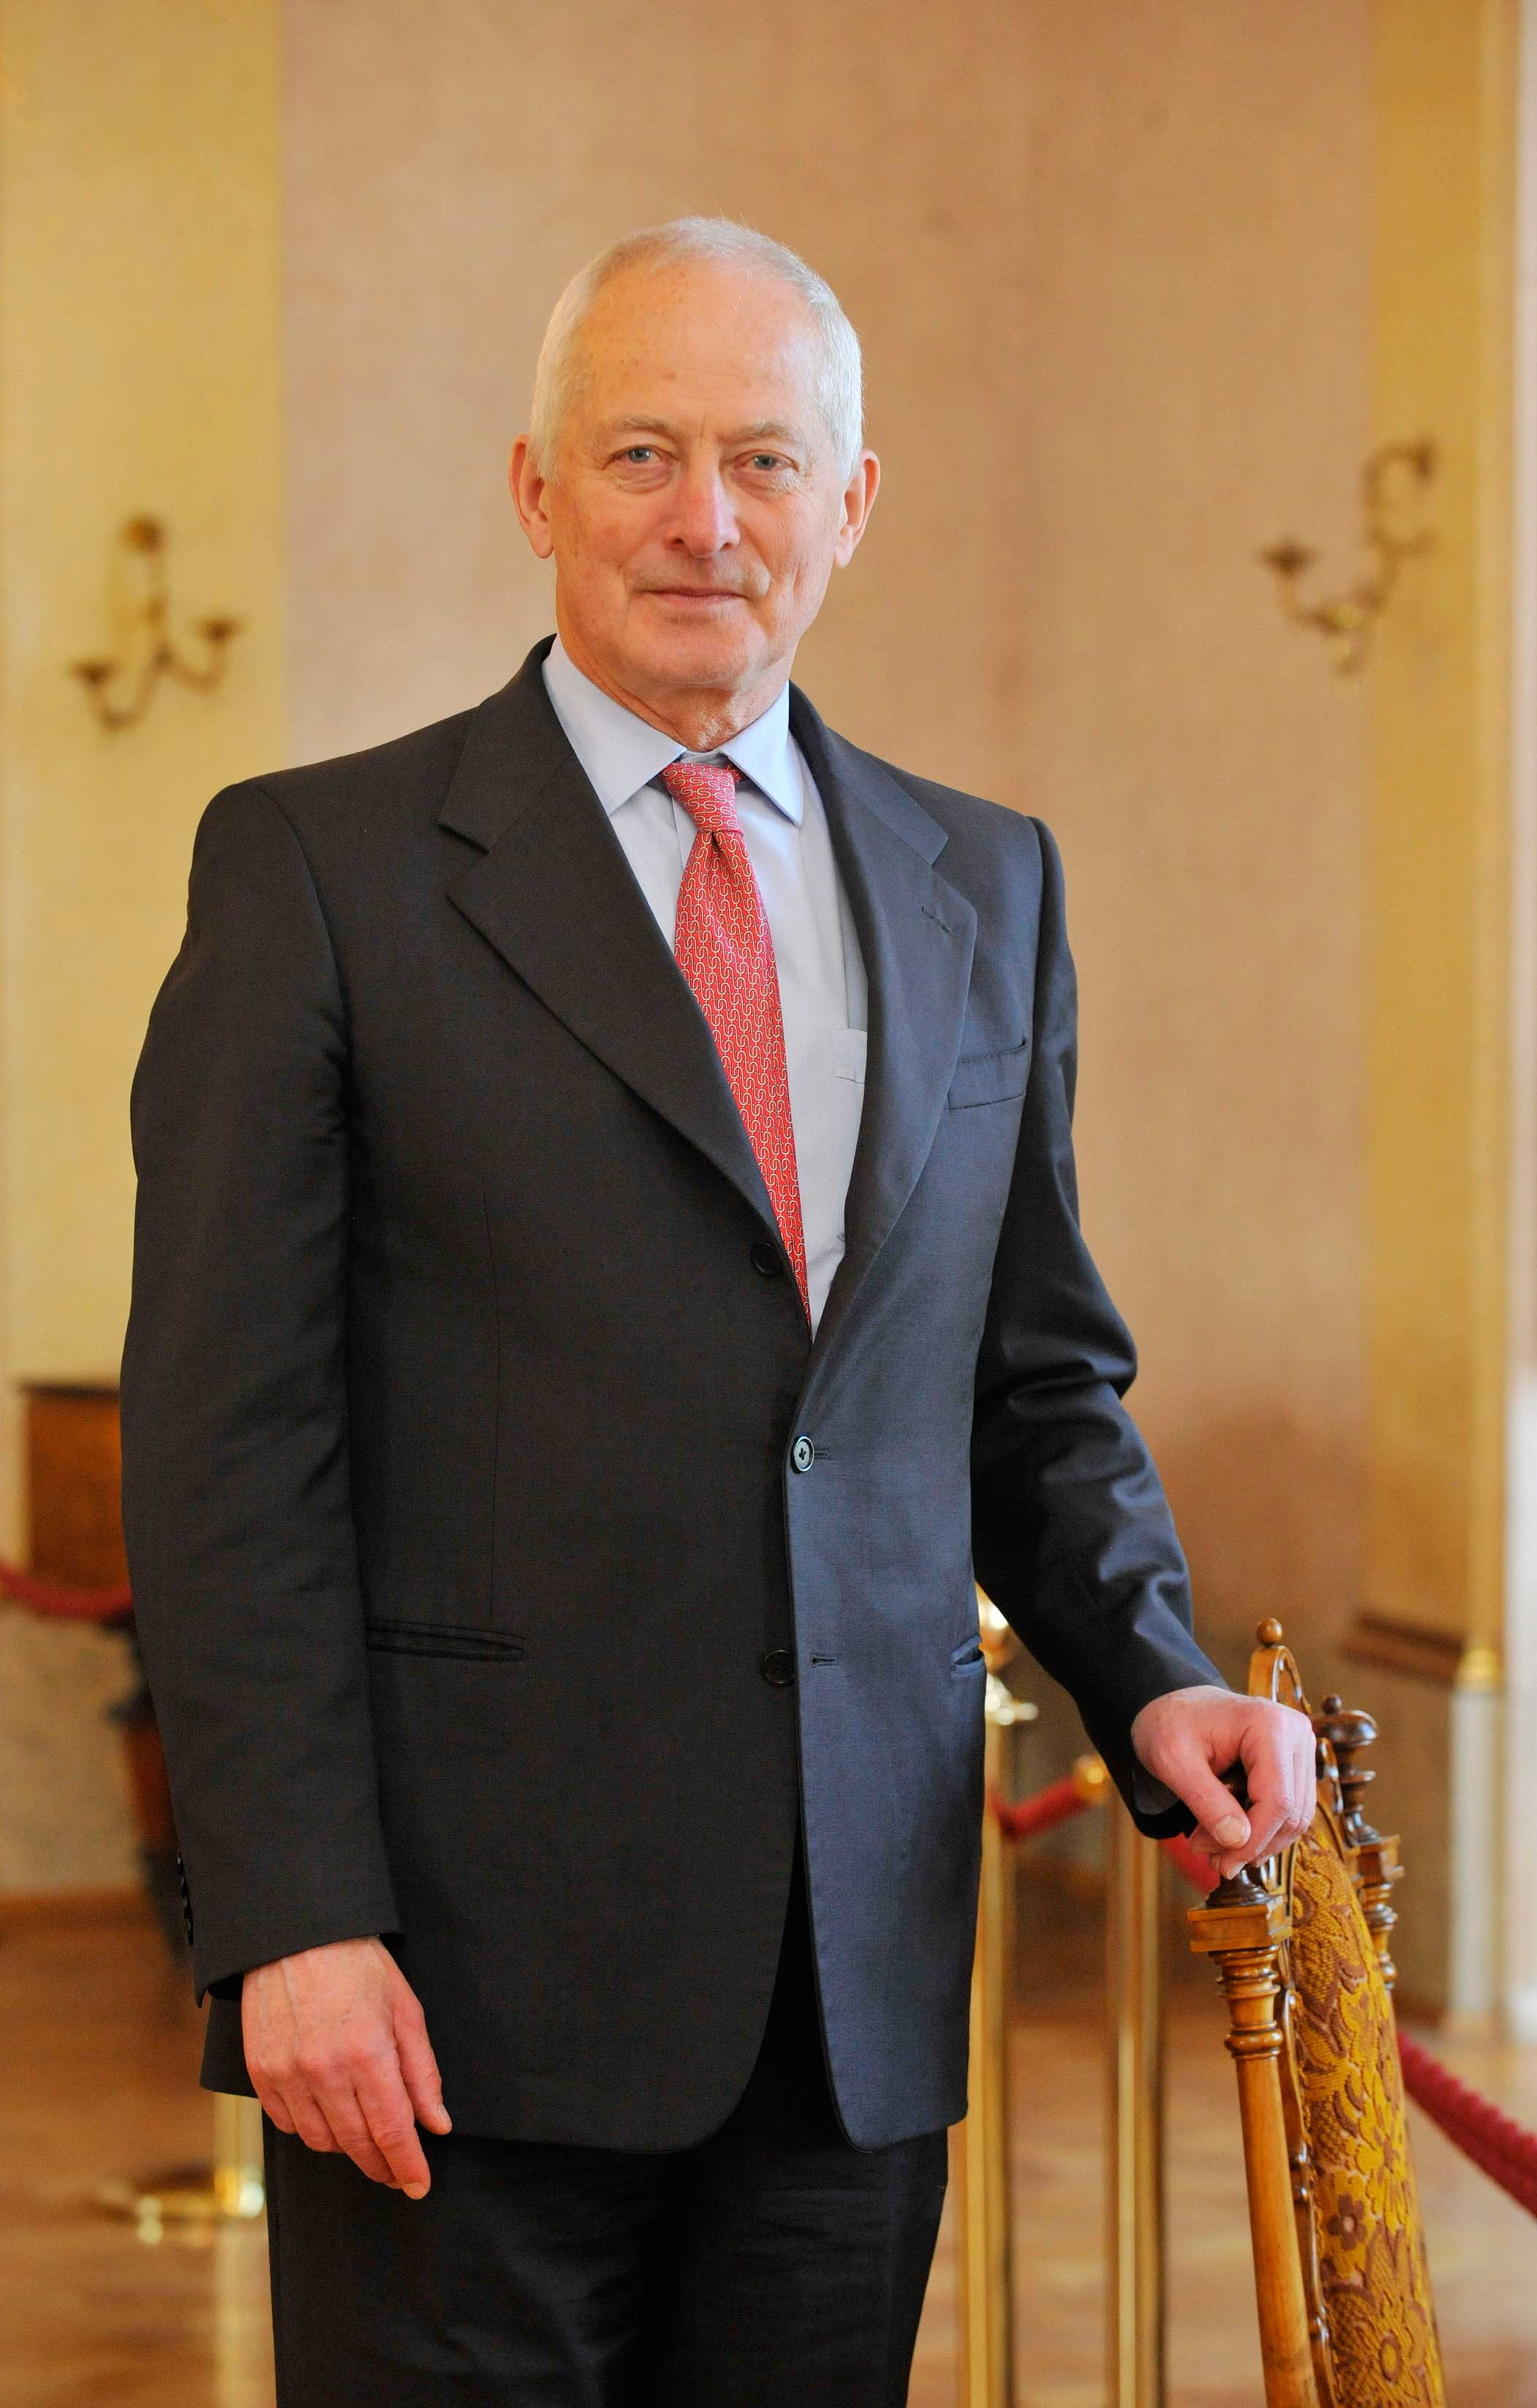 Reigning Prince of Liechtenstein Hans-Adam II is seen during his visit in Olomouc, Czech Republic on May 20, 2014 on the occasion of the presentation of proceedings of international scientific conference titled Princely House of Liechtenstein family in the history of the Czech lands.